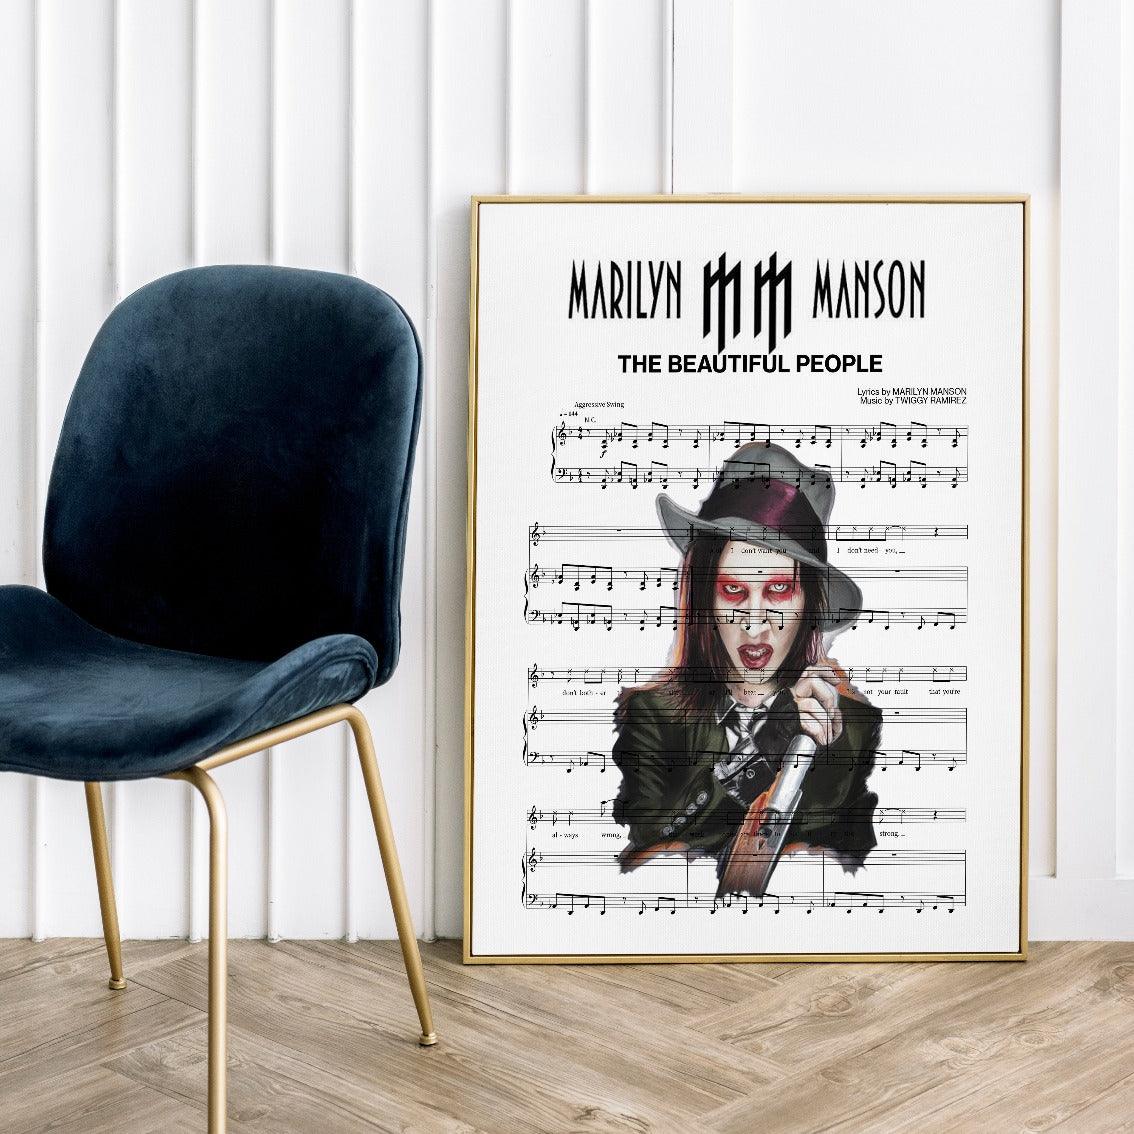 Print lyrical with these unusual and Natural High quality black and white musical scores with brightly coloured illustrations and quirky art print by artist Marilyn Manson to put on the wall of the room at home. A4 Posters uk By 98types art online.